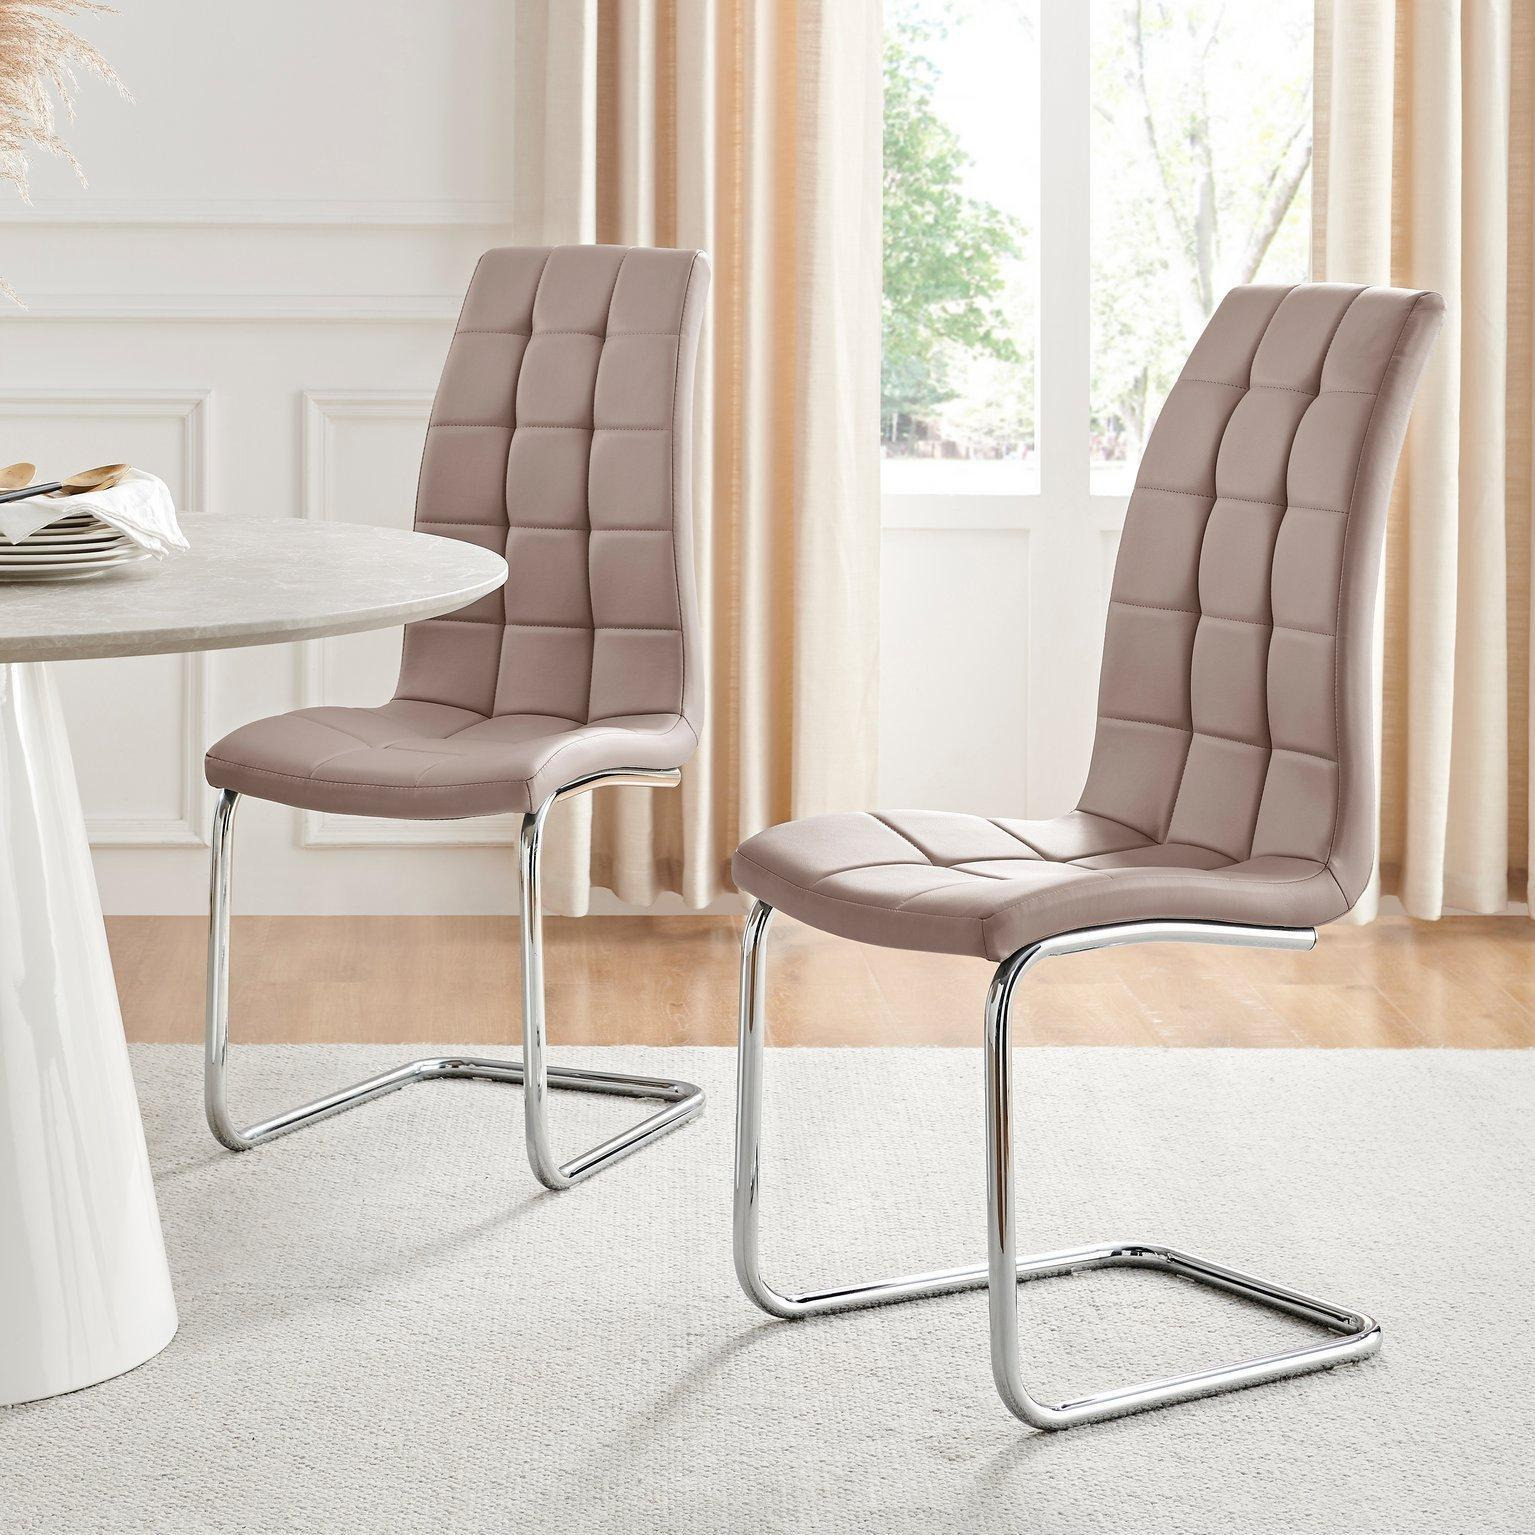 Set of 2 Murano Deep Cushioned Soft Touch Faux Leather Dining Chairs With Silver Chrome Metal Legs - image 1